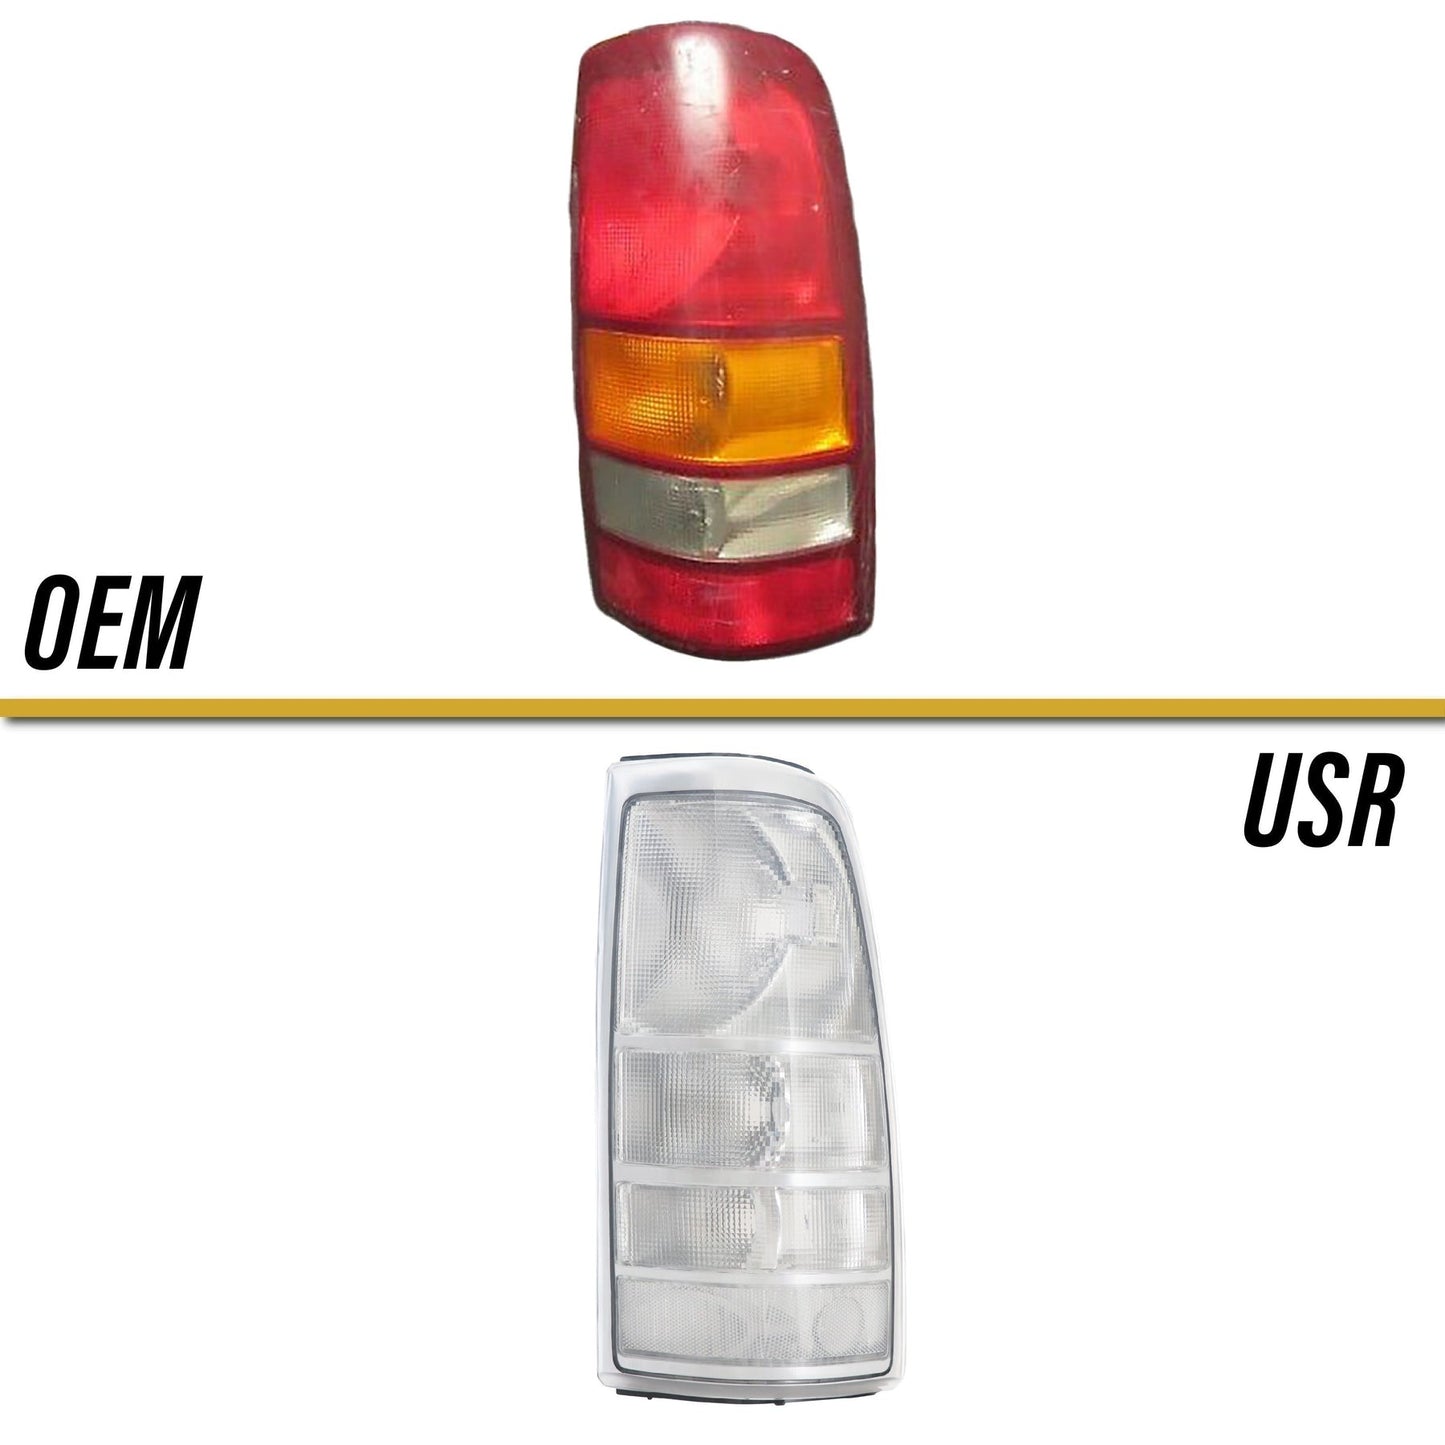 1999-2002 Chevrolet Silverado / 1999-2007 GMC Sierra All Clear Tail Lights - Made by Unique Style Racing Exclusive